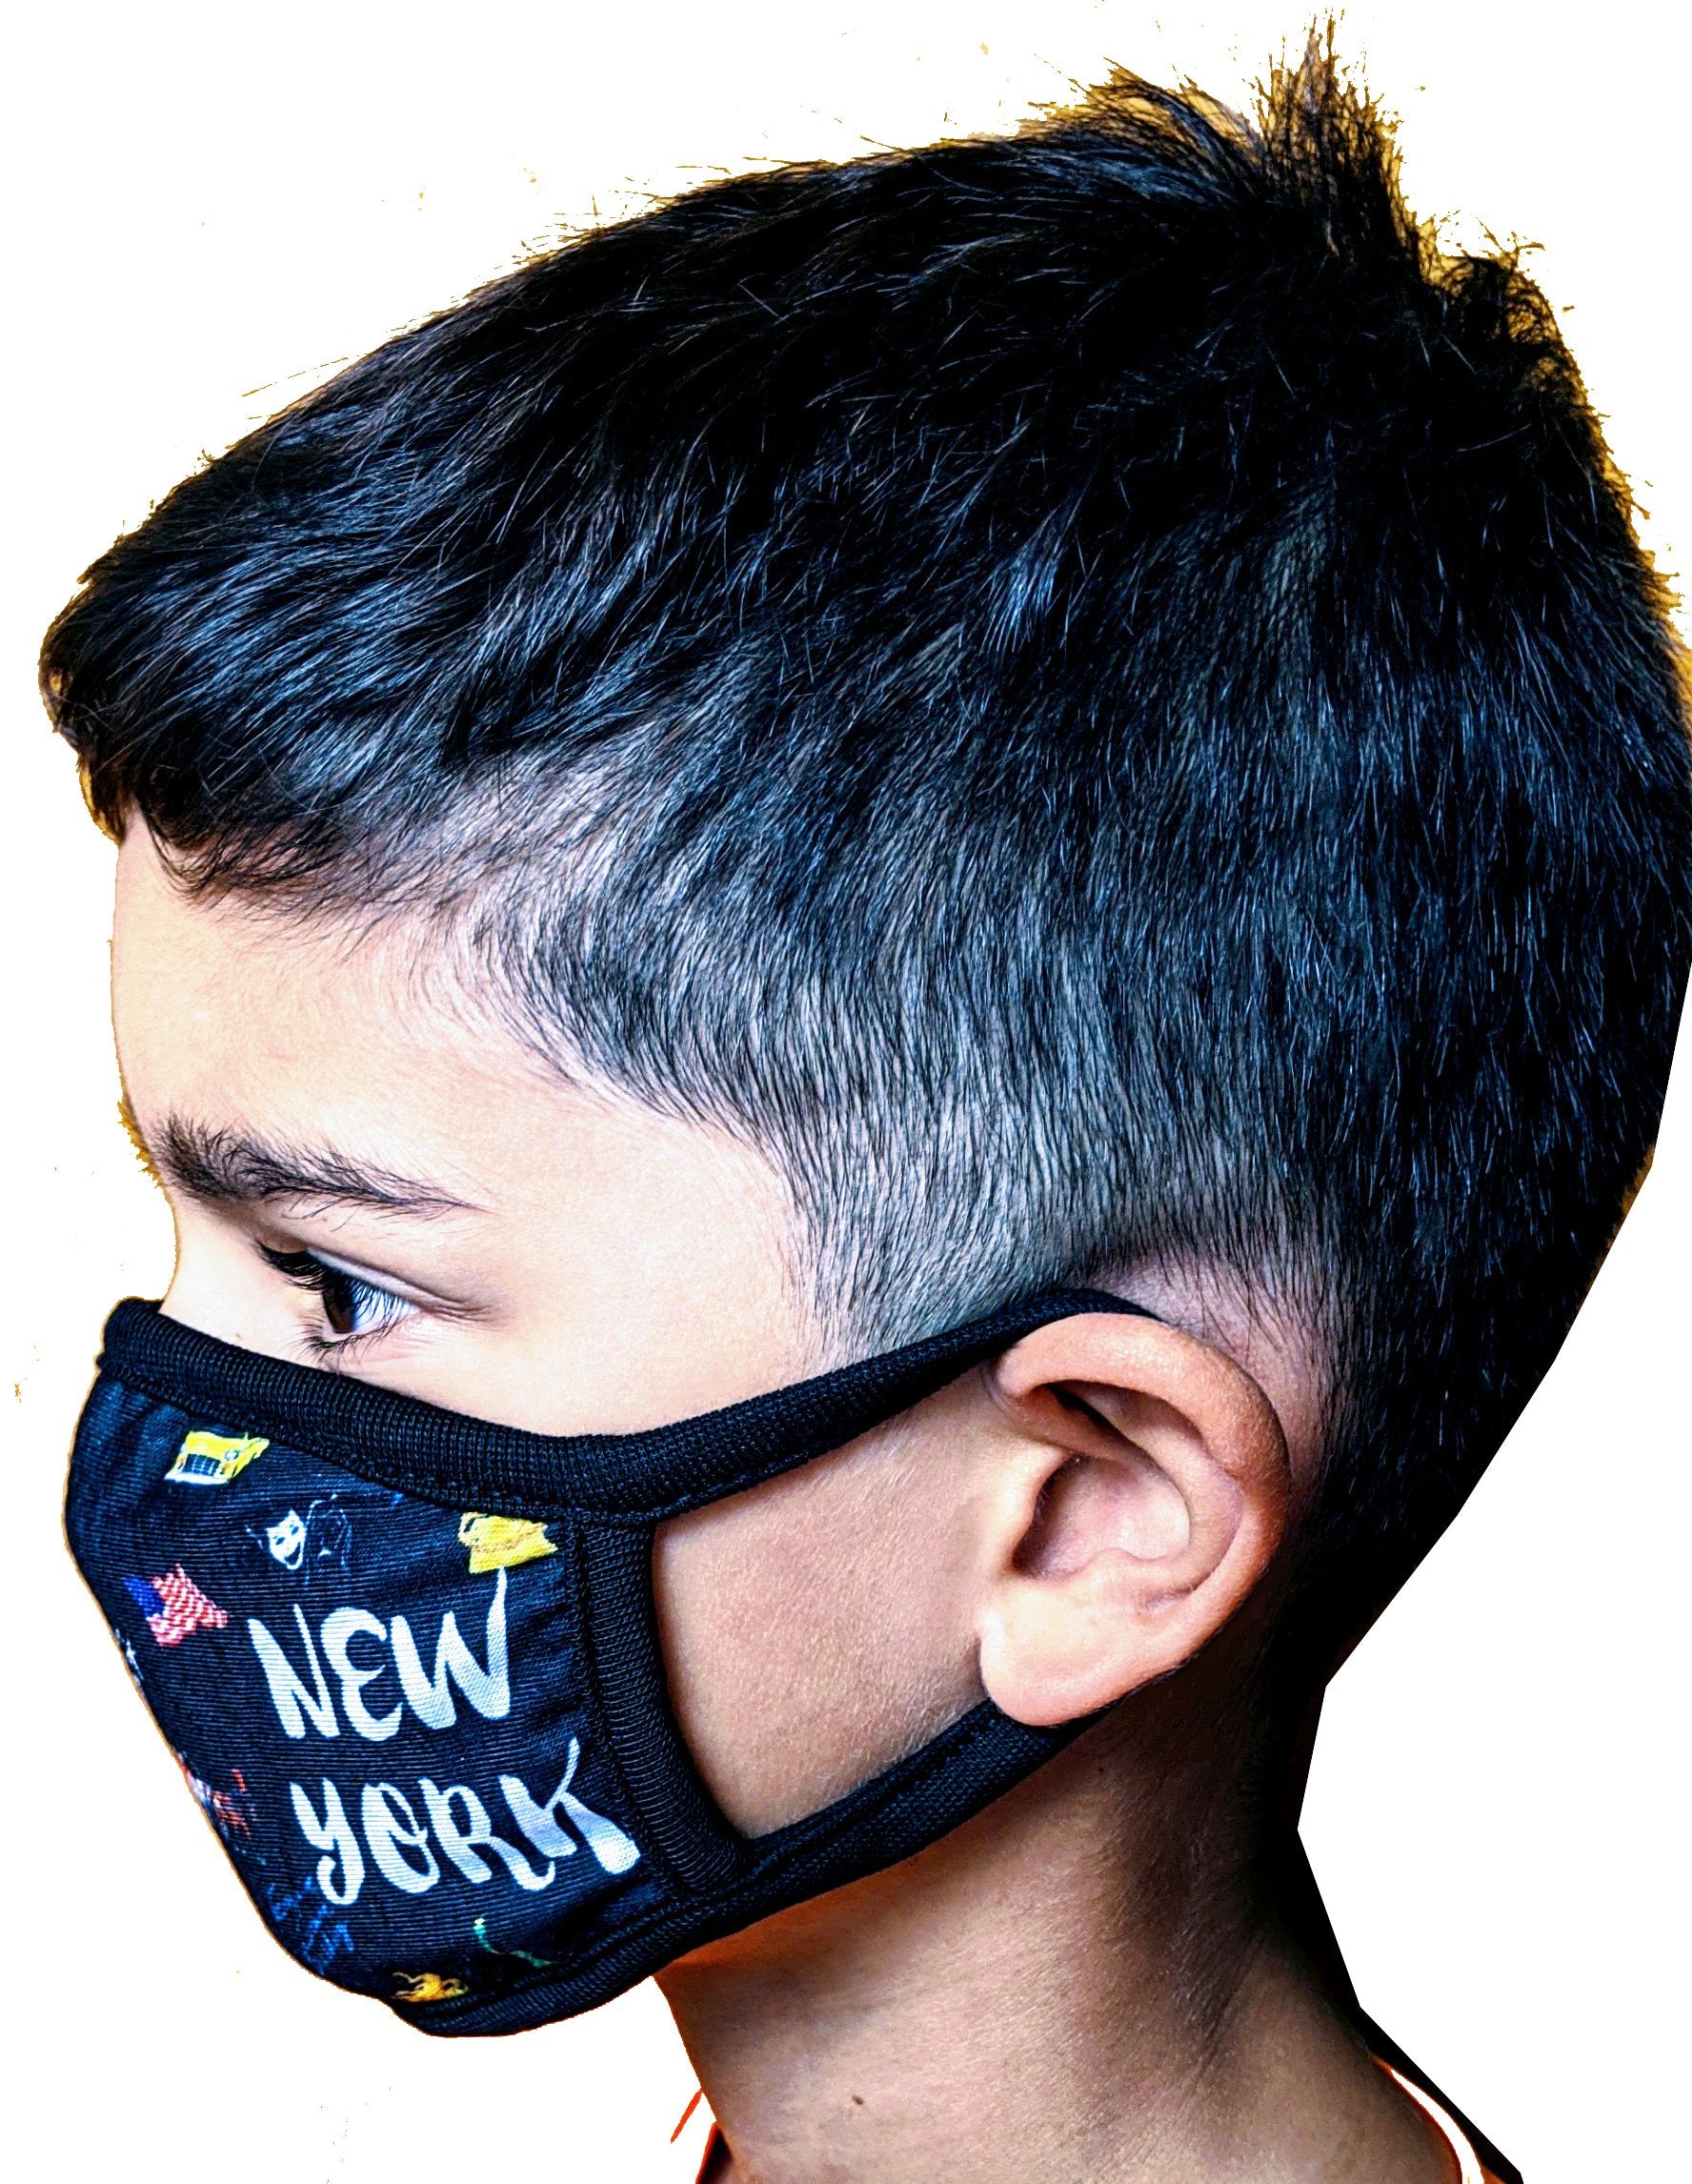 UItimate New York USA Kids Face Mask One Size Facemask